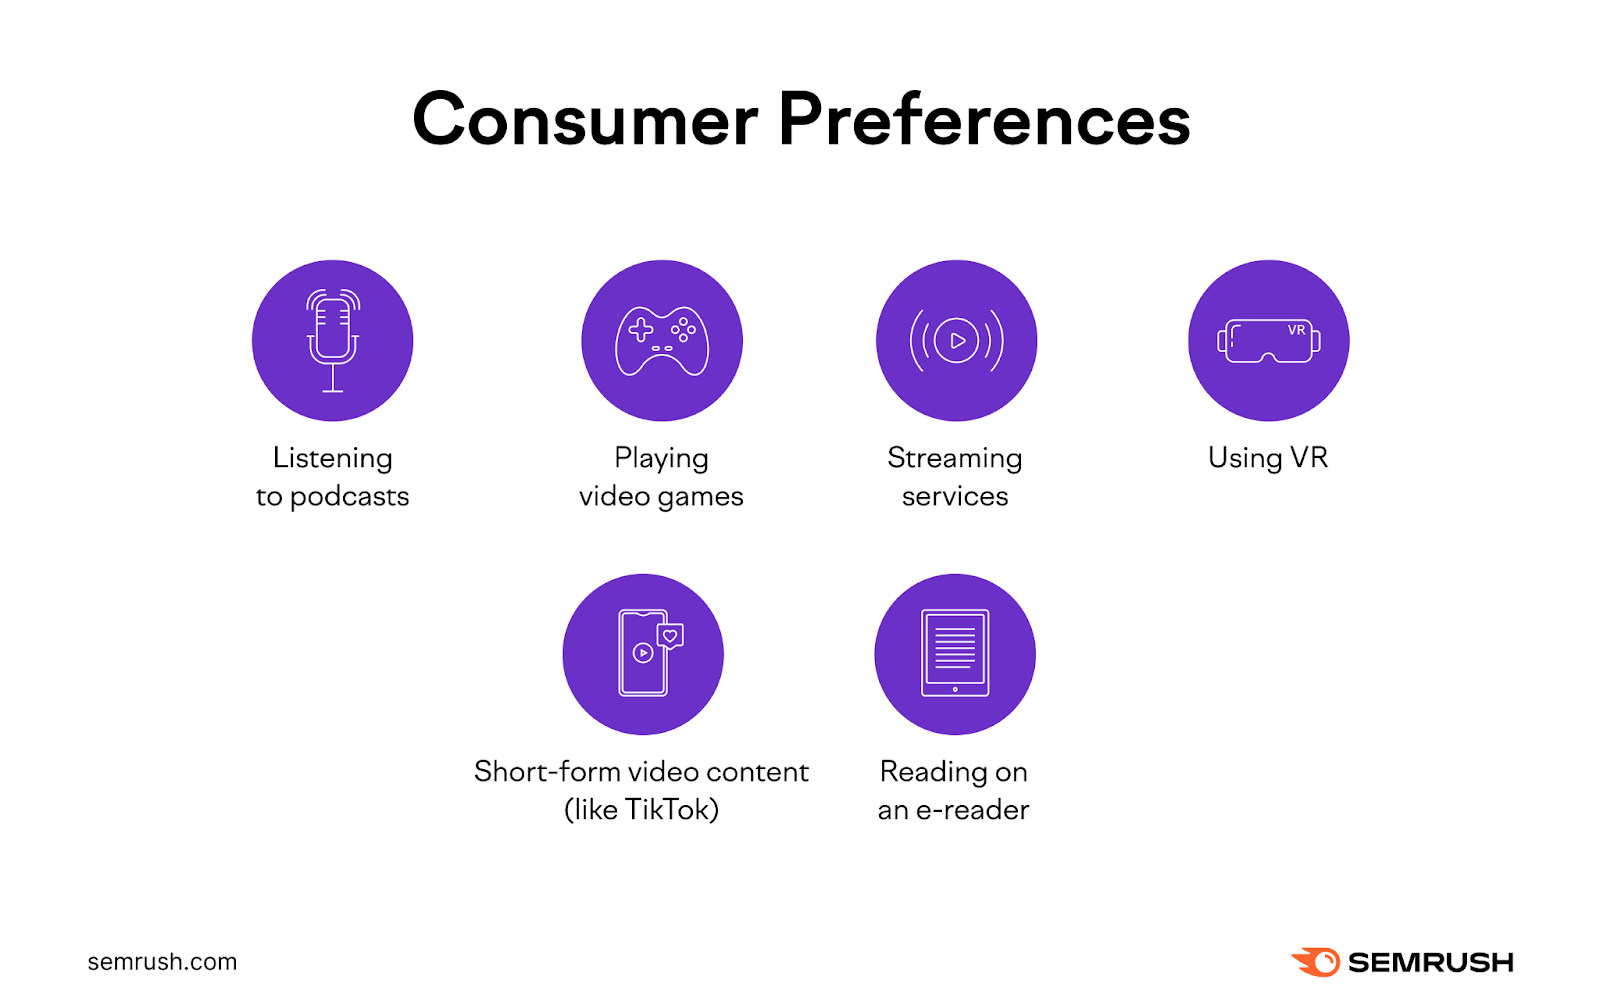 Examples of consumer preferences, including listening to podcasts, playing video games, short-form video content (like TikTok), and others